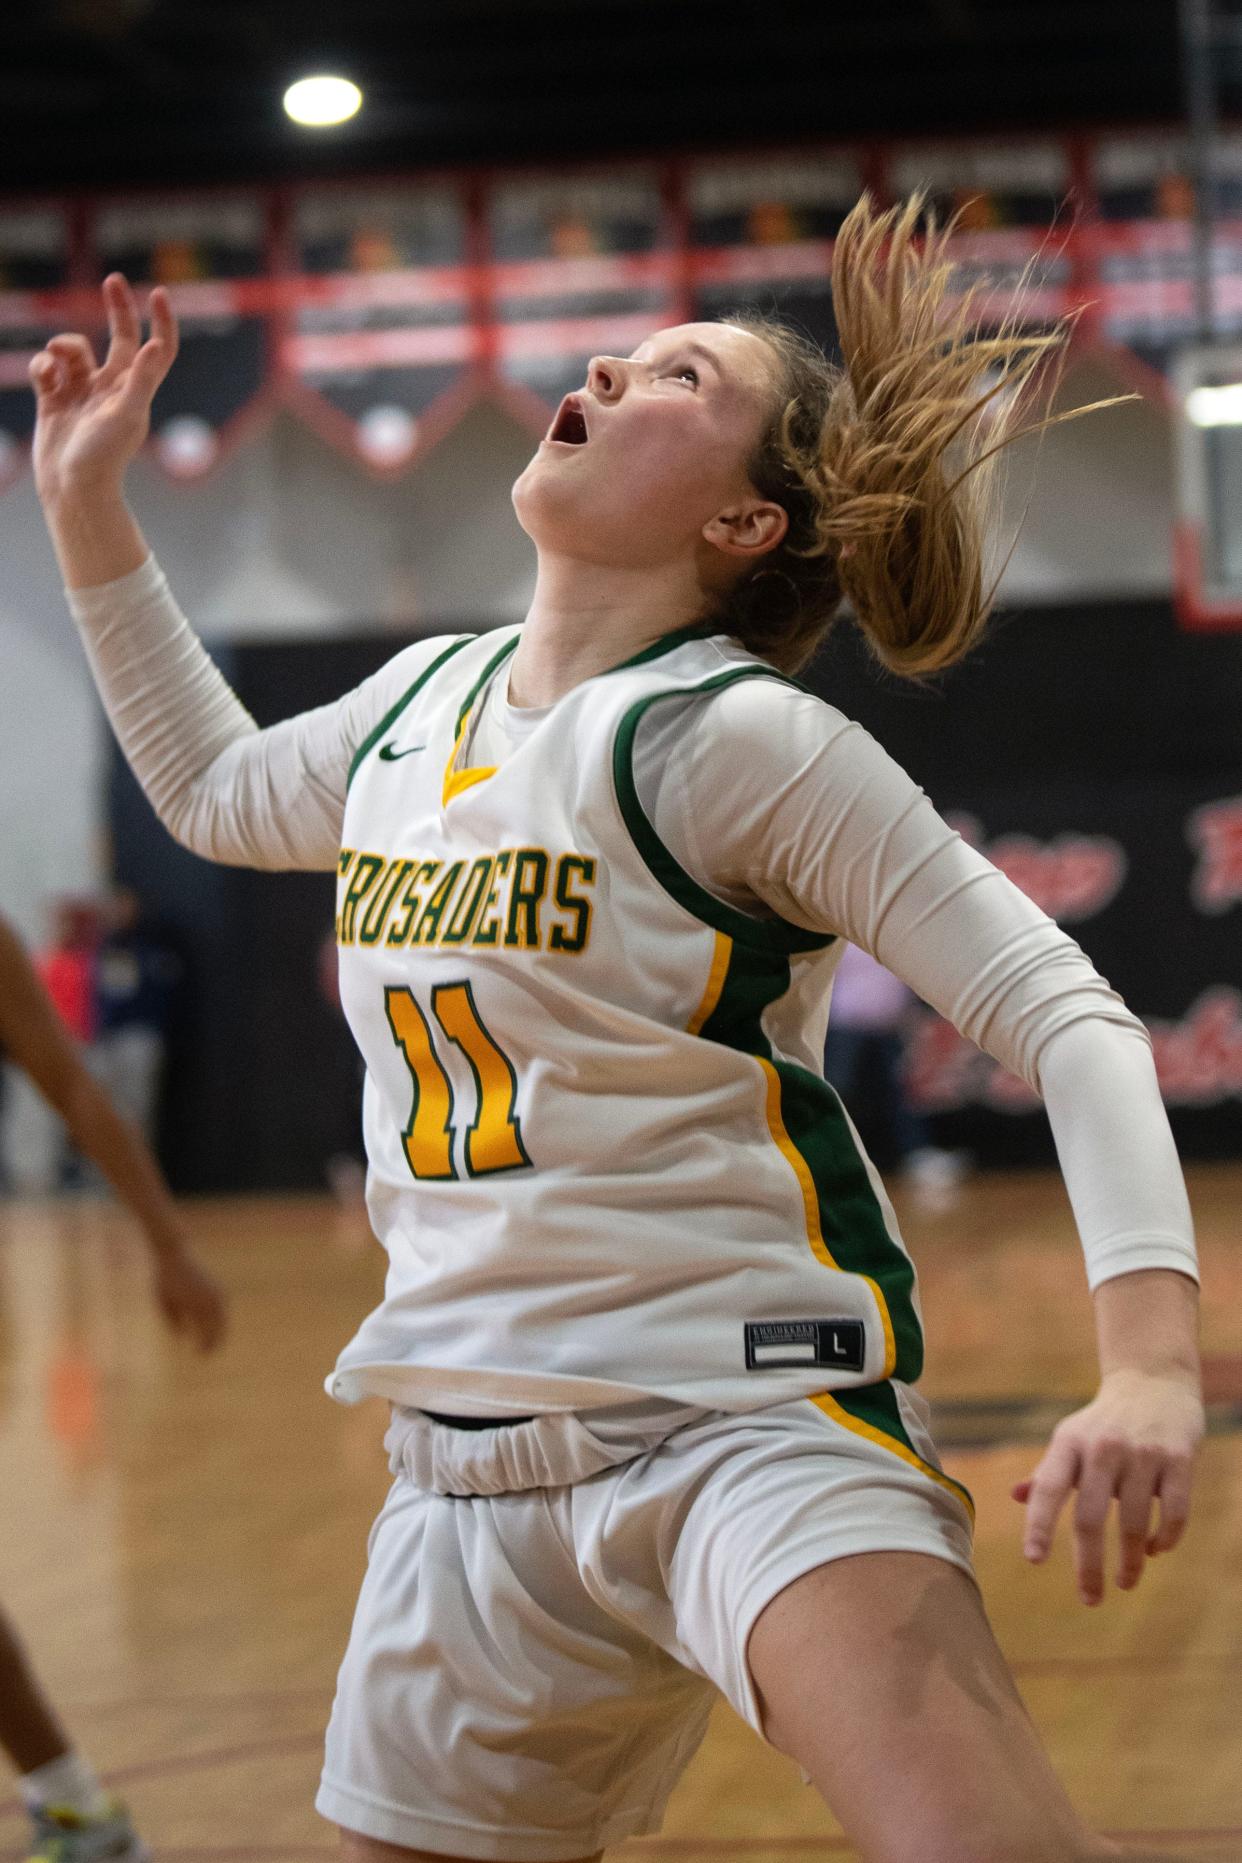 Lansdale Catholic junior Olivia Boccella follows the ball at Archbishop Ryan High School in Philadelphia on Saturday, March 11, 2023. Lansdale Catholic girls basketball defeated Bishop McDevitt in the first round of the PIAA championships, 61-45.